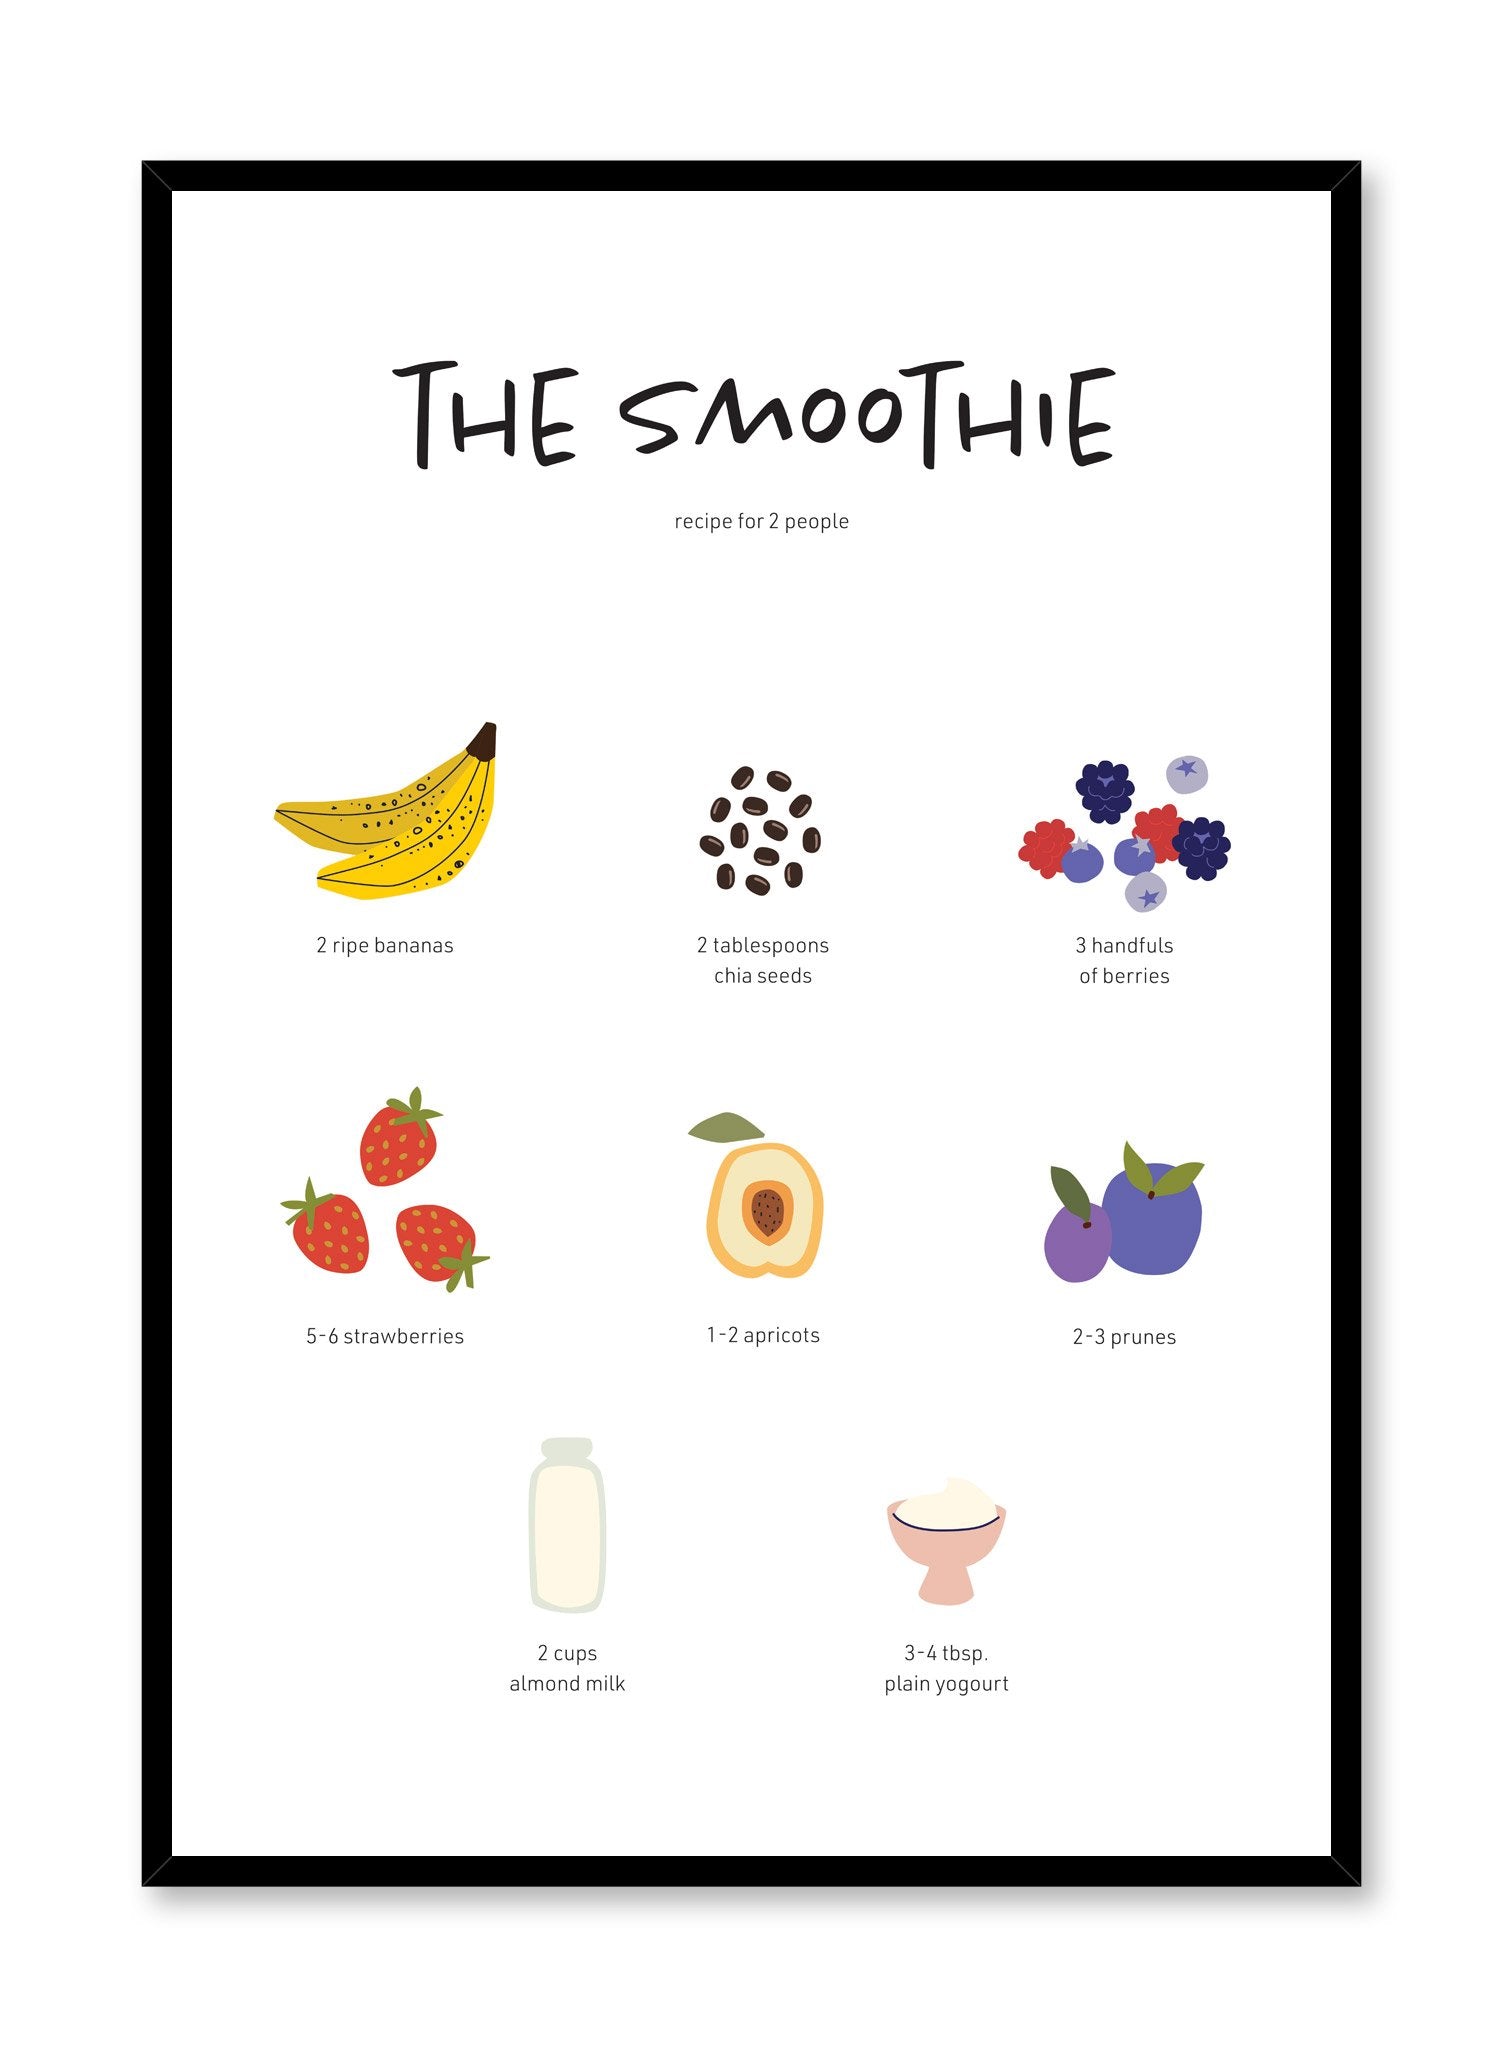 Smoothie Recipe is an illustrated recipe poster by Opposite Wall.